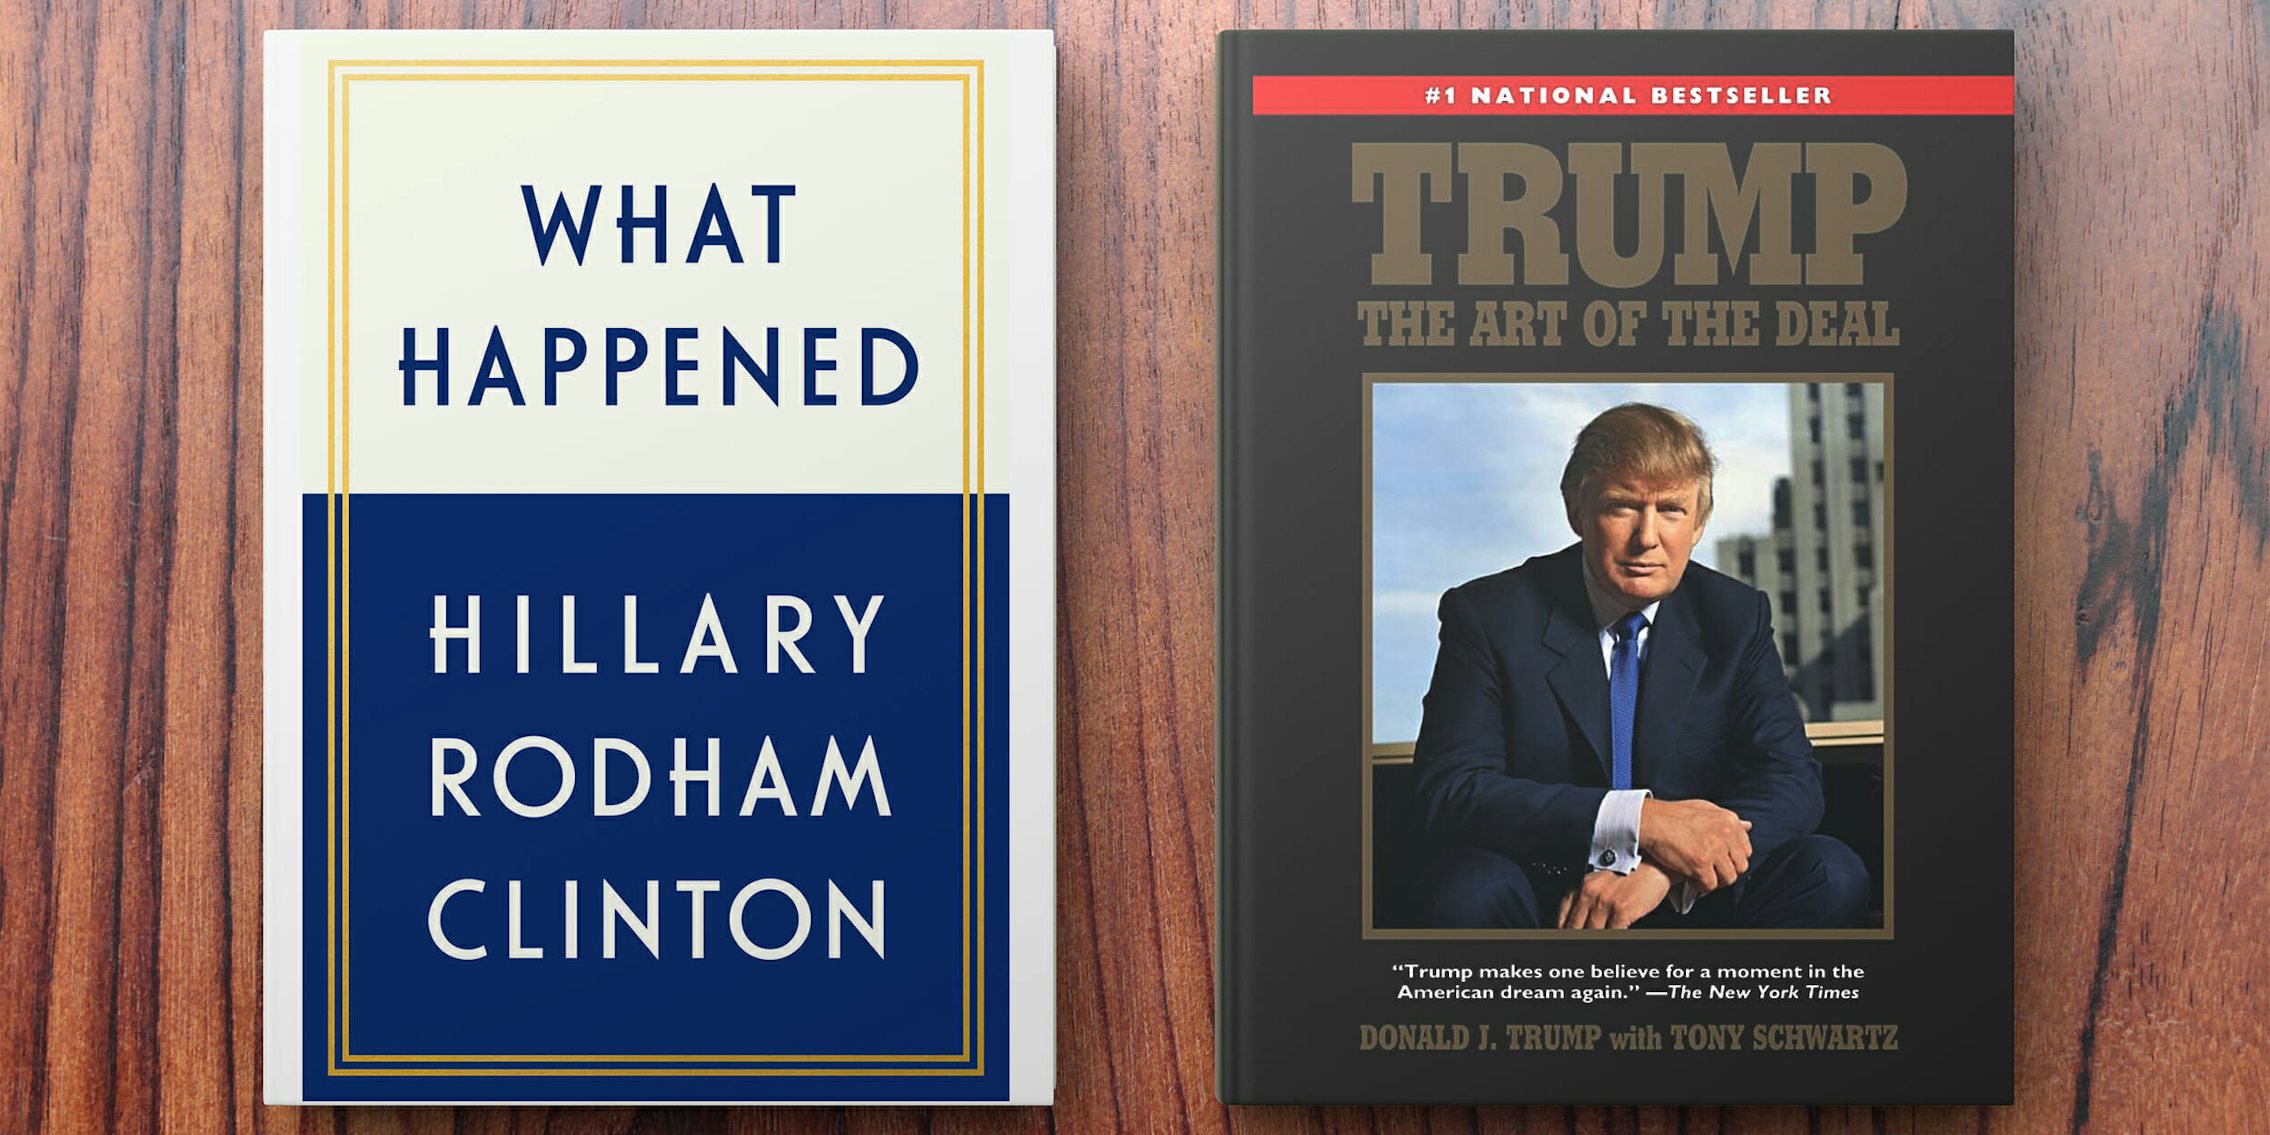 'What Happened' by Hillary Rodham Clinton and 'Art of the Deal' by Donald Trump on table